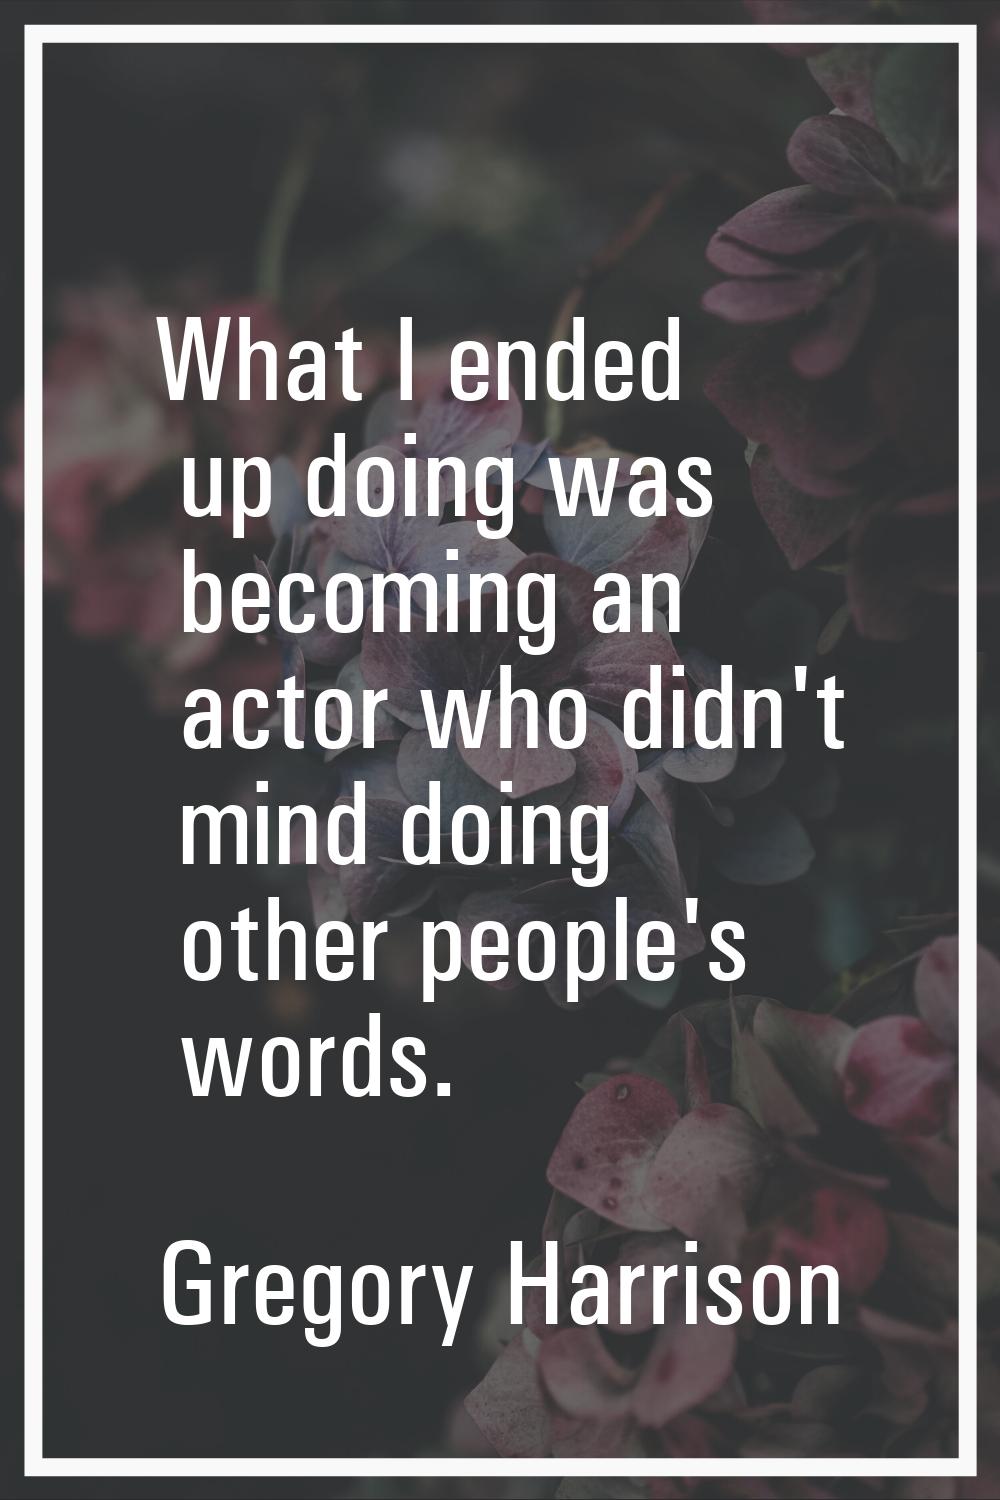 What I ended up doing was becoming an actor who didn't mind doing other people's words.